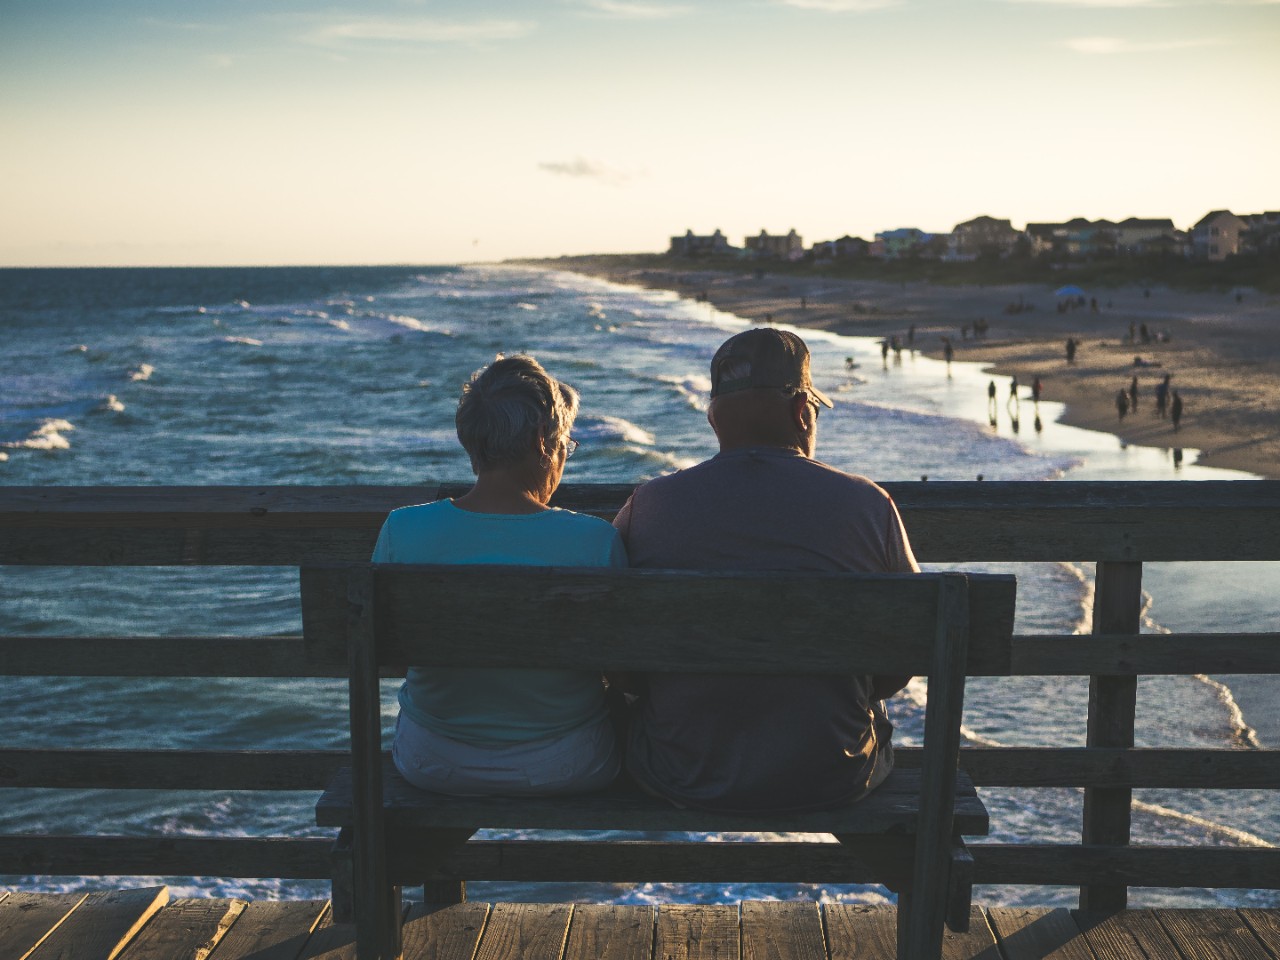 Elderly womand and man, couple, sitting on bench looking out at beach on pier.